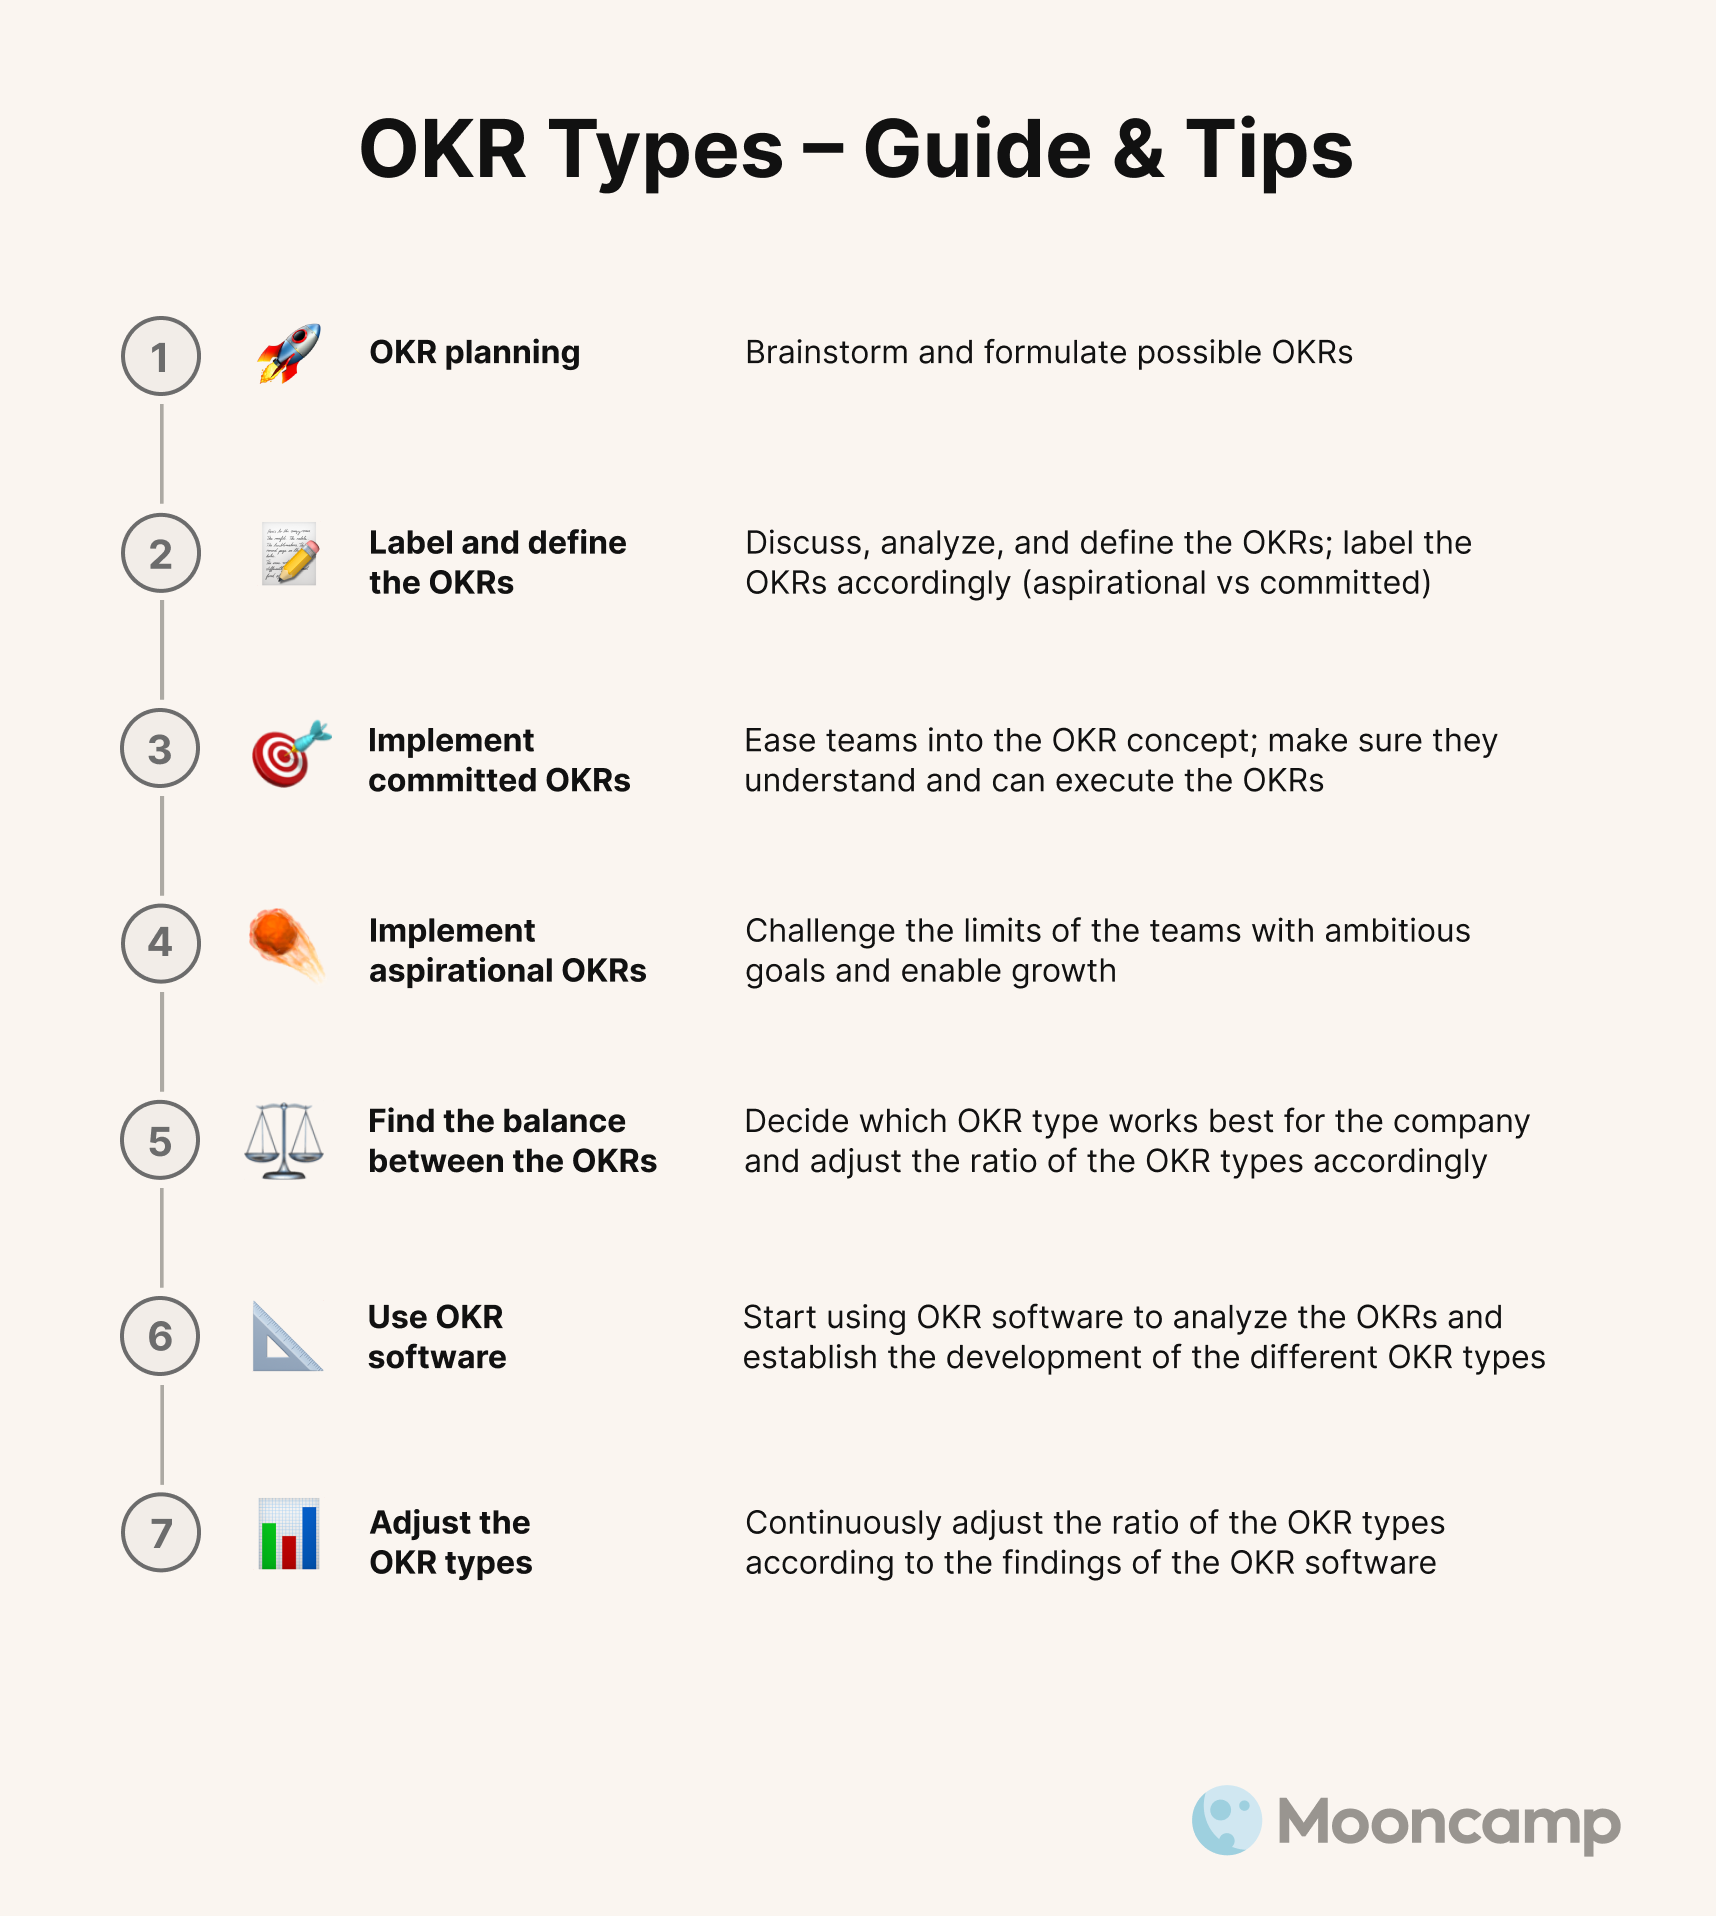 Aspirational and Committed OKRs implementation guide